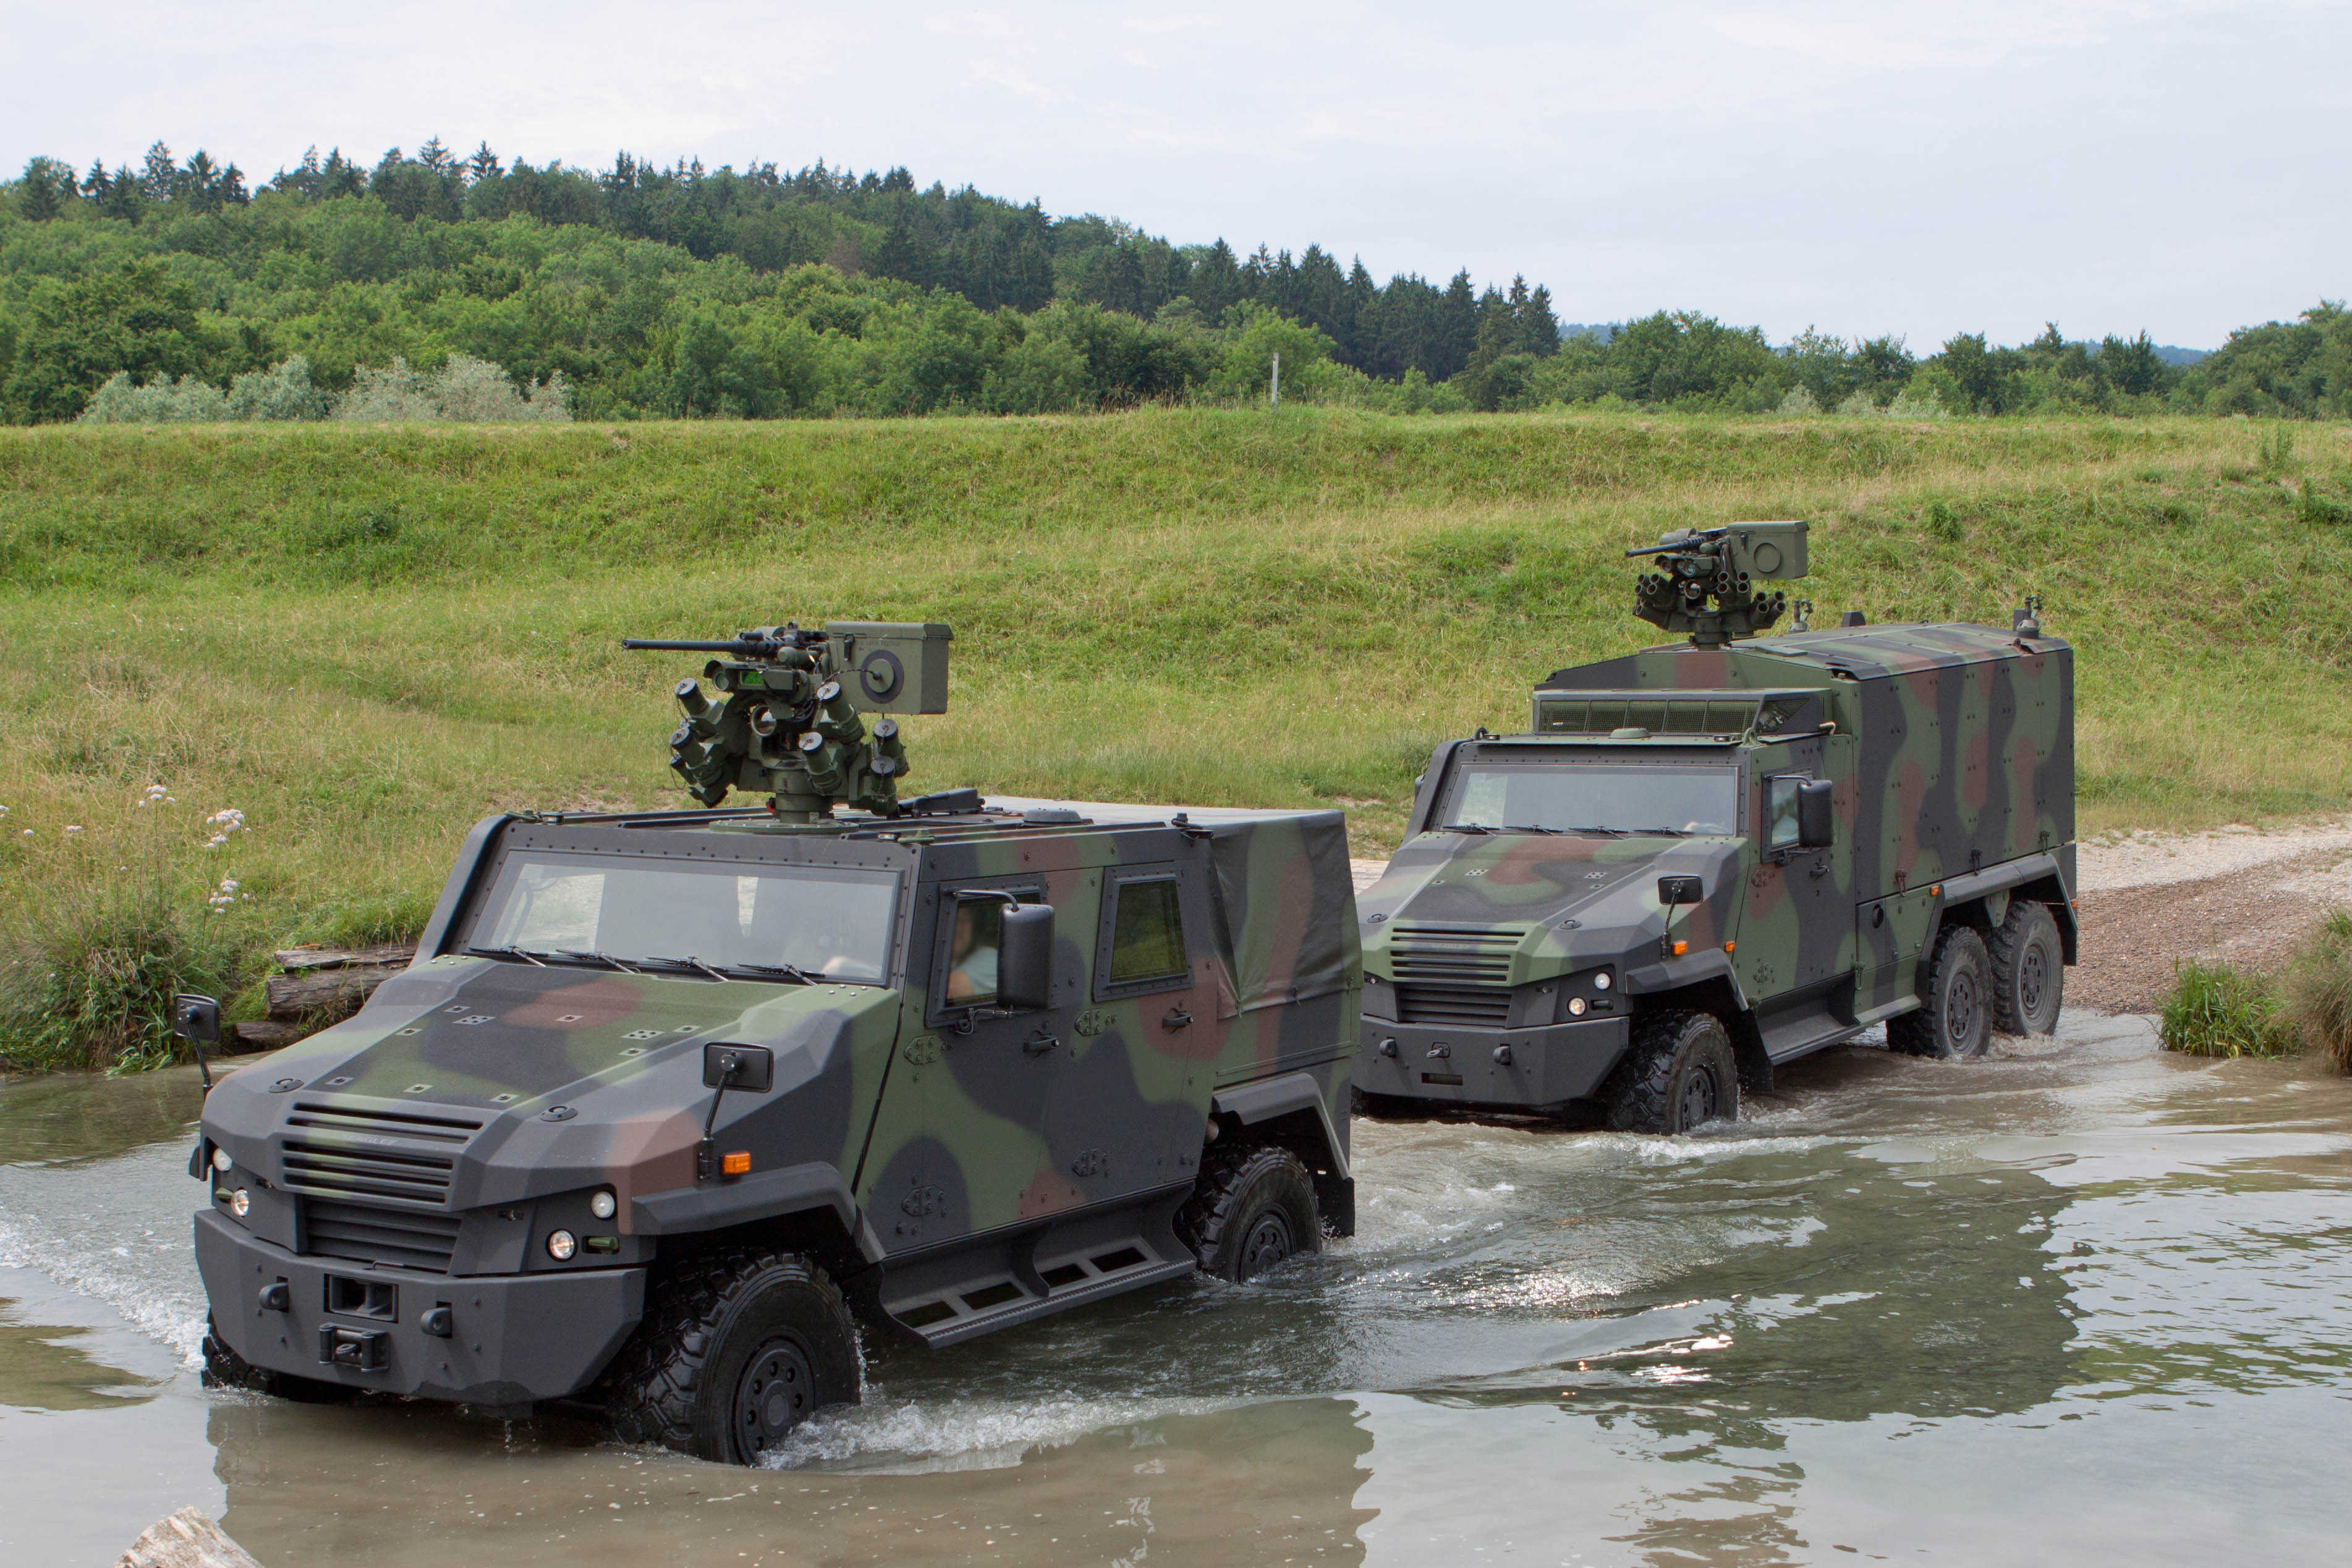 Eagle vehicles from GDELS. Credit GDELS-MOWAG.